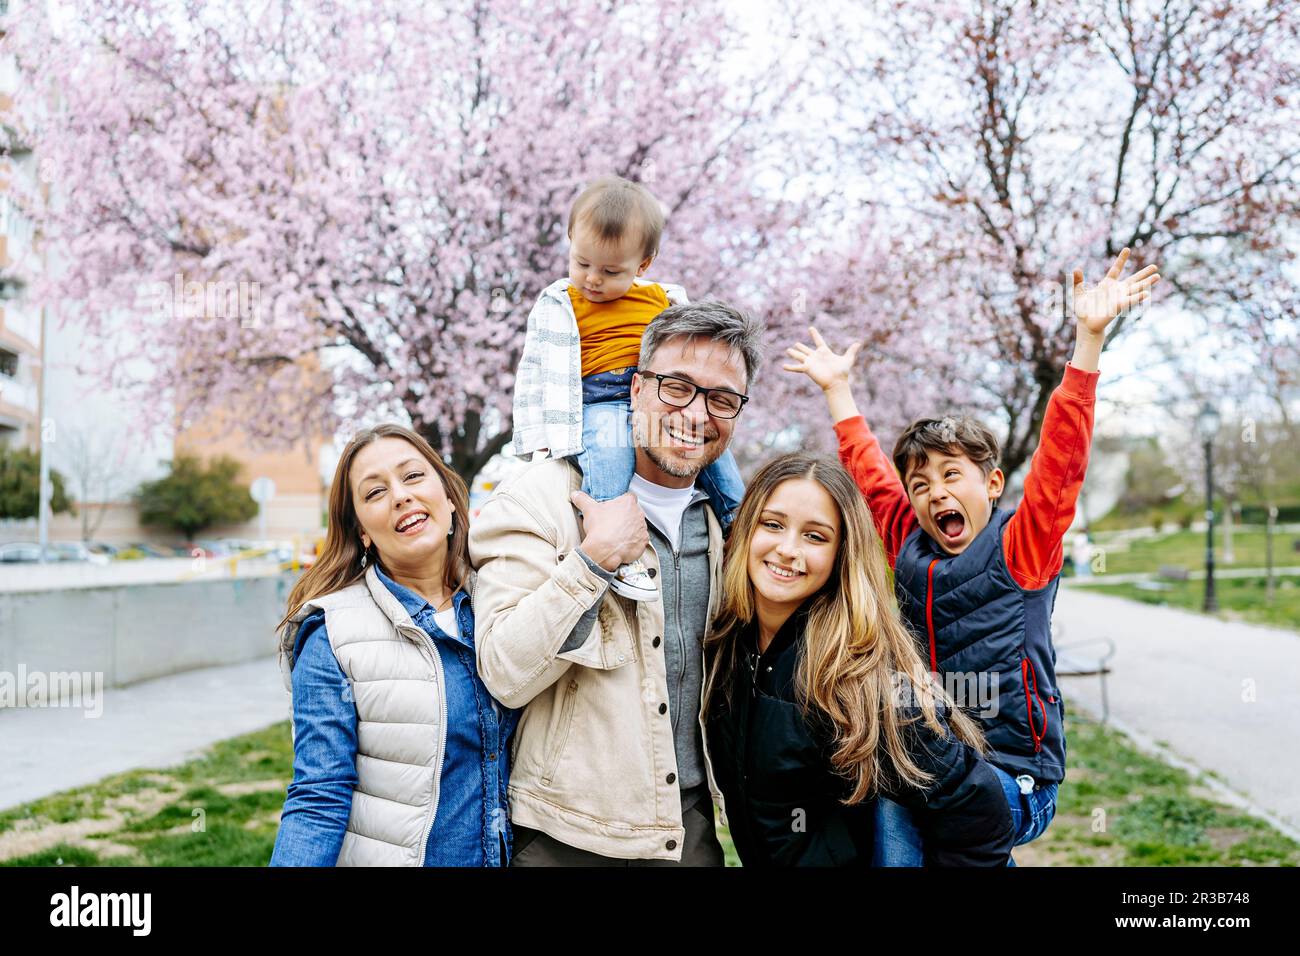 Cheerful family spending leisure time at park Stock Photo